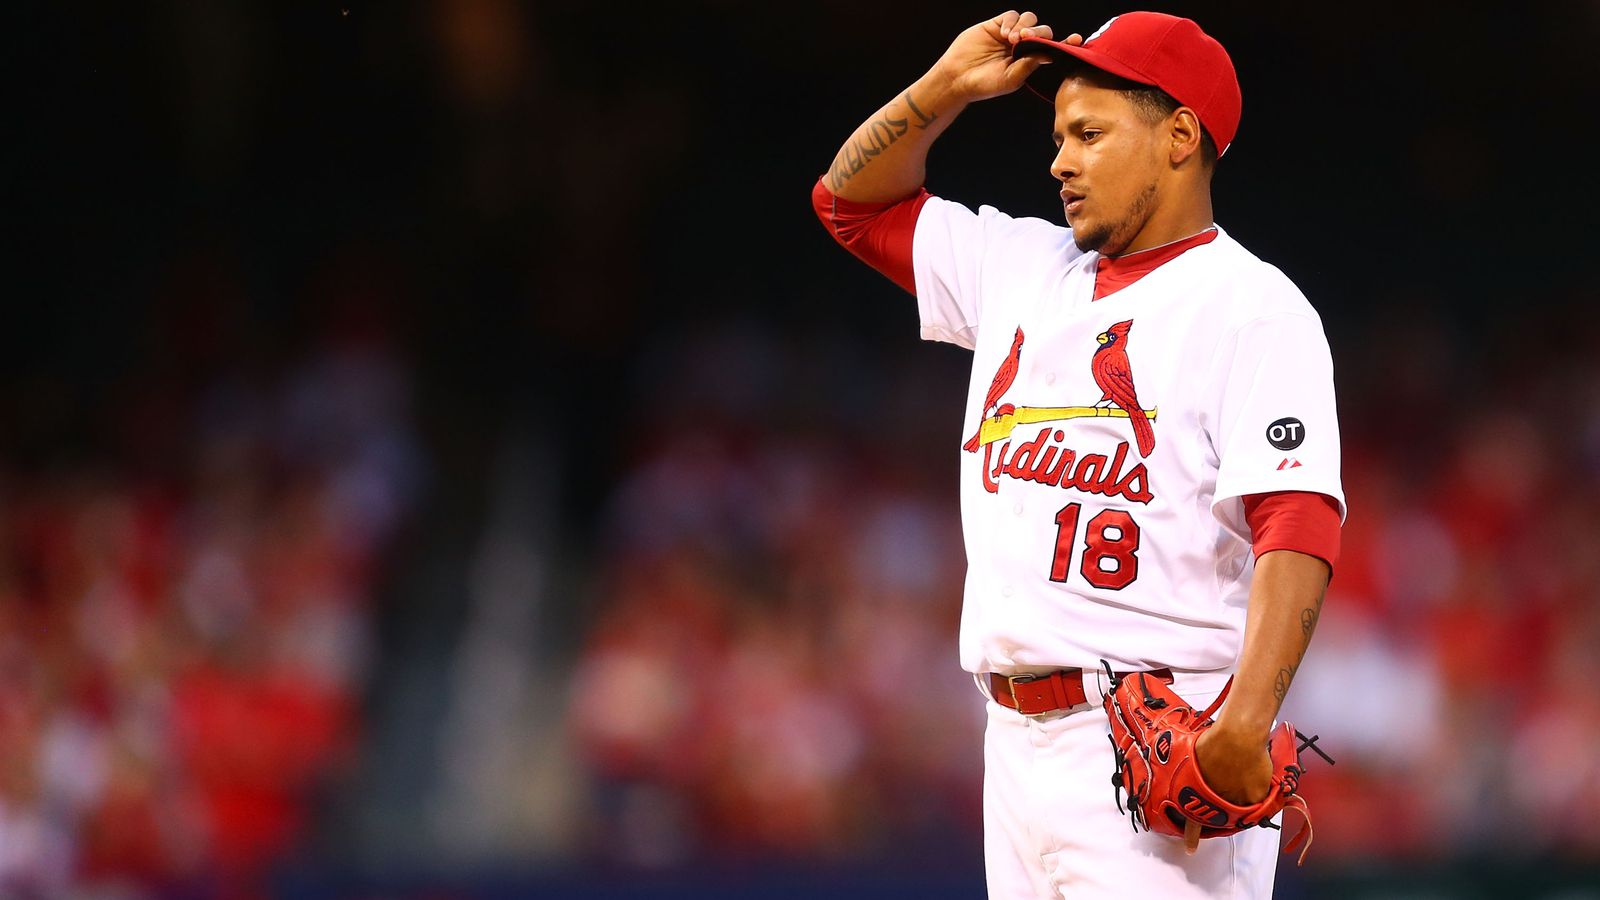 Carlos Martinez Is Ready For The Season Sports Daily